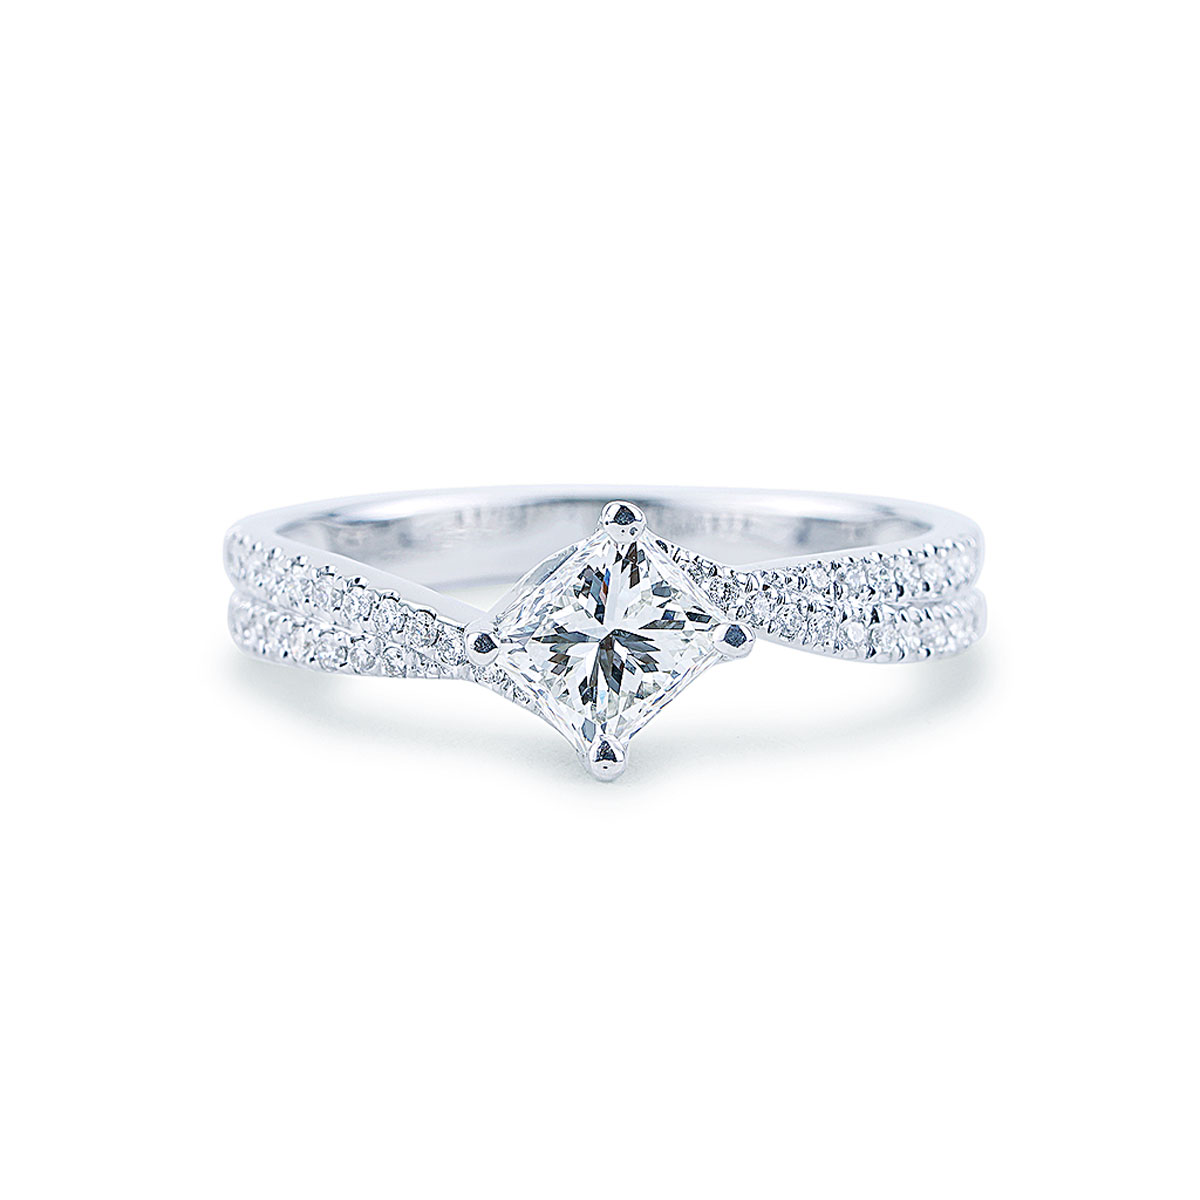 How Much Does A Diamond Engagement Ring Cost? | Buying Guides